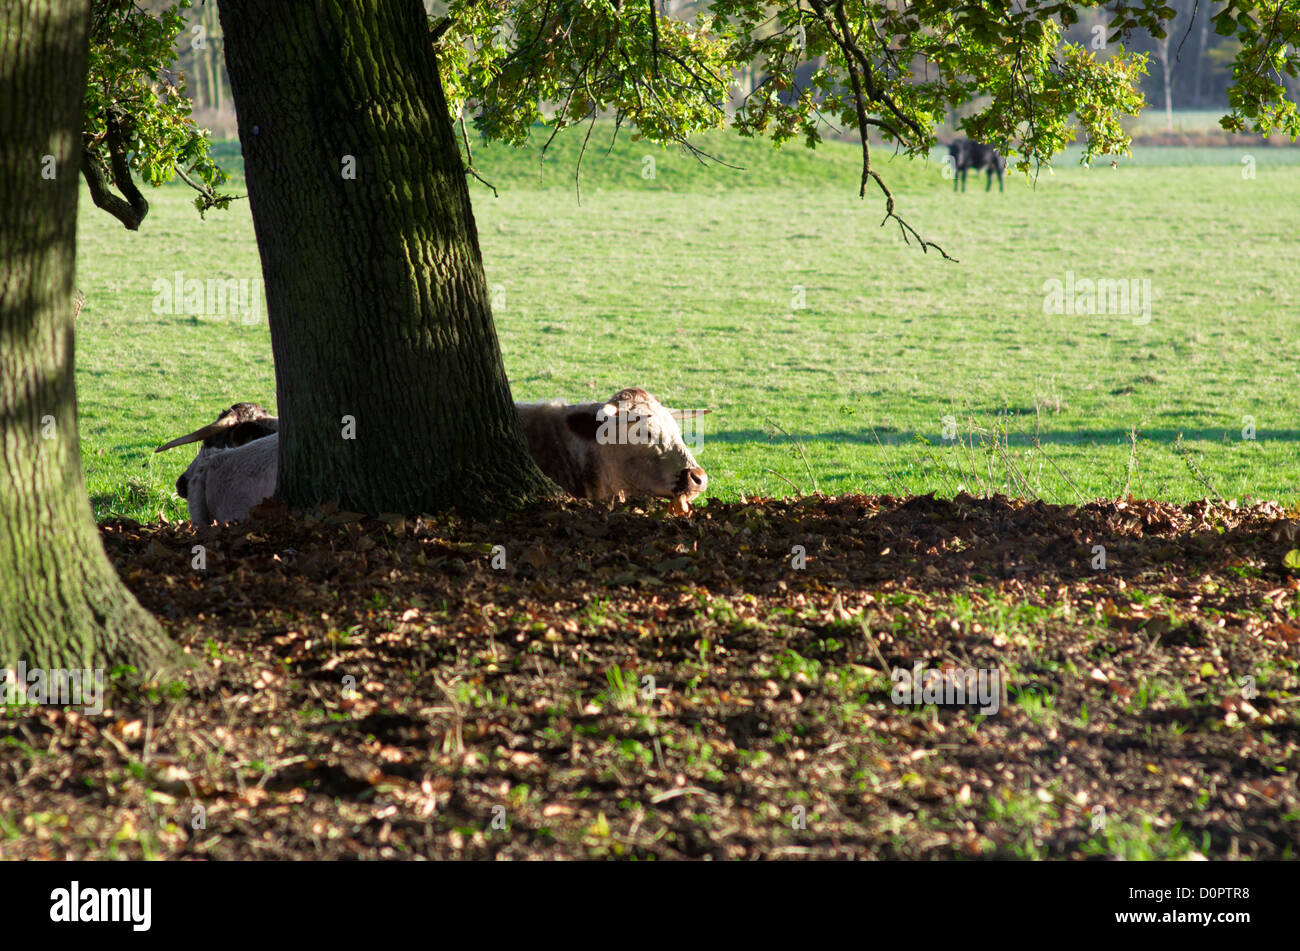 Cattle resting under a tree, Christ Church Meadow, Oxford, UK Stock Photo